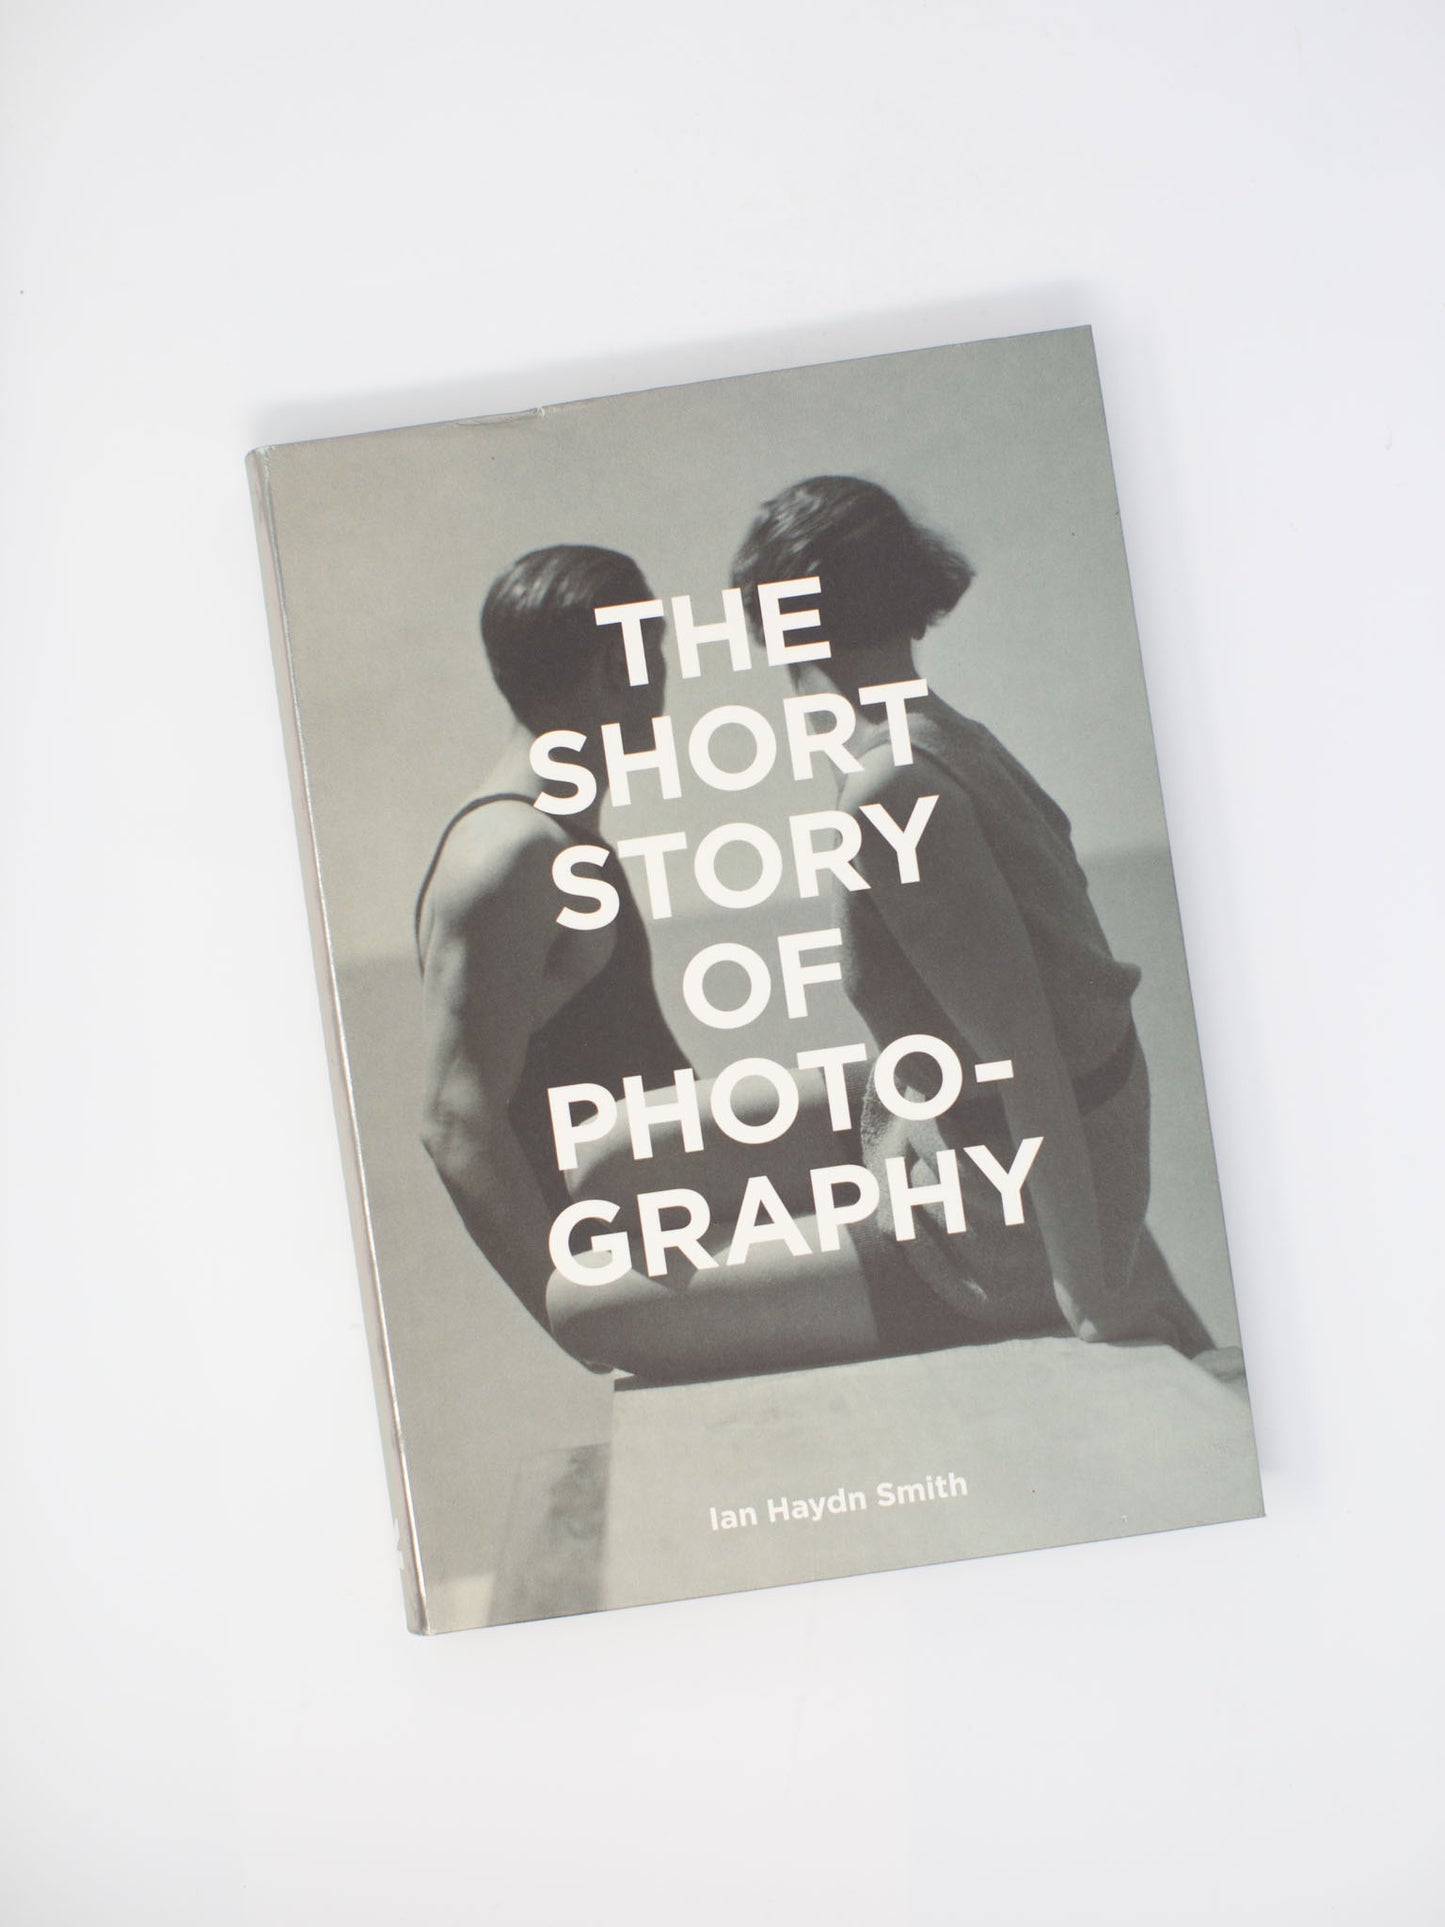 The Short Story of Photography: A Pocket Guide to Key Genres, Works, Themes & Techniques